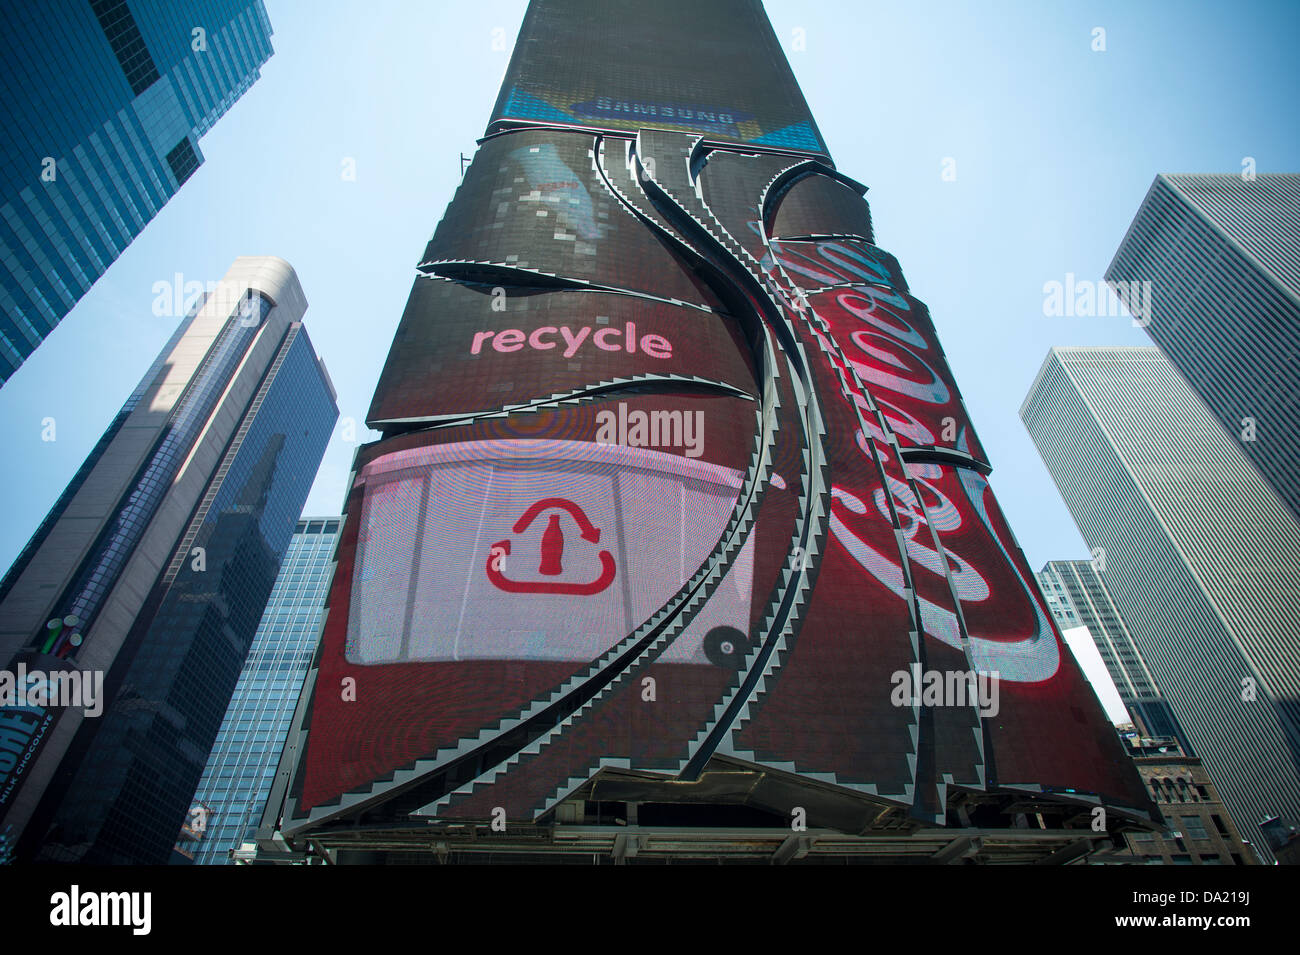 Coca-Cola billboard seen in Times Square, in New York on Friday, June 21, 2013. (© Frances M. Roberts) Stock Photo